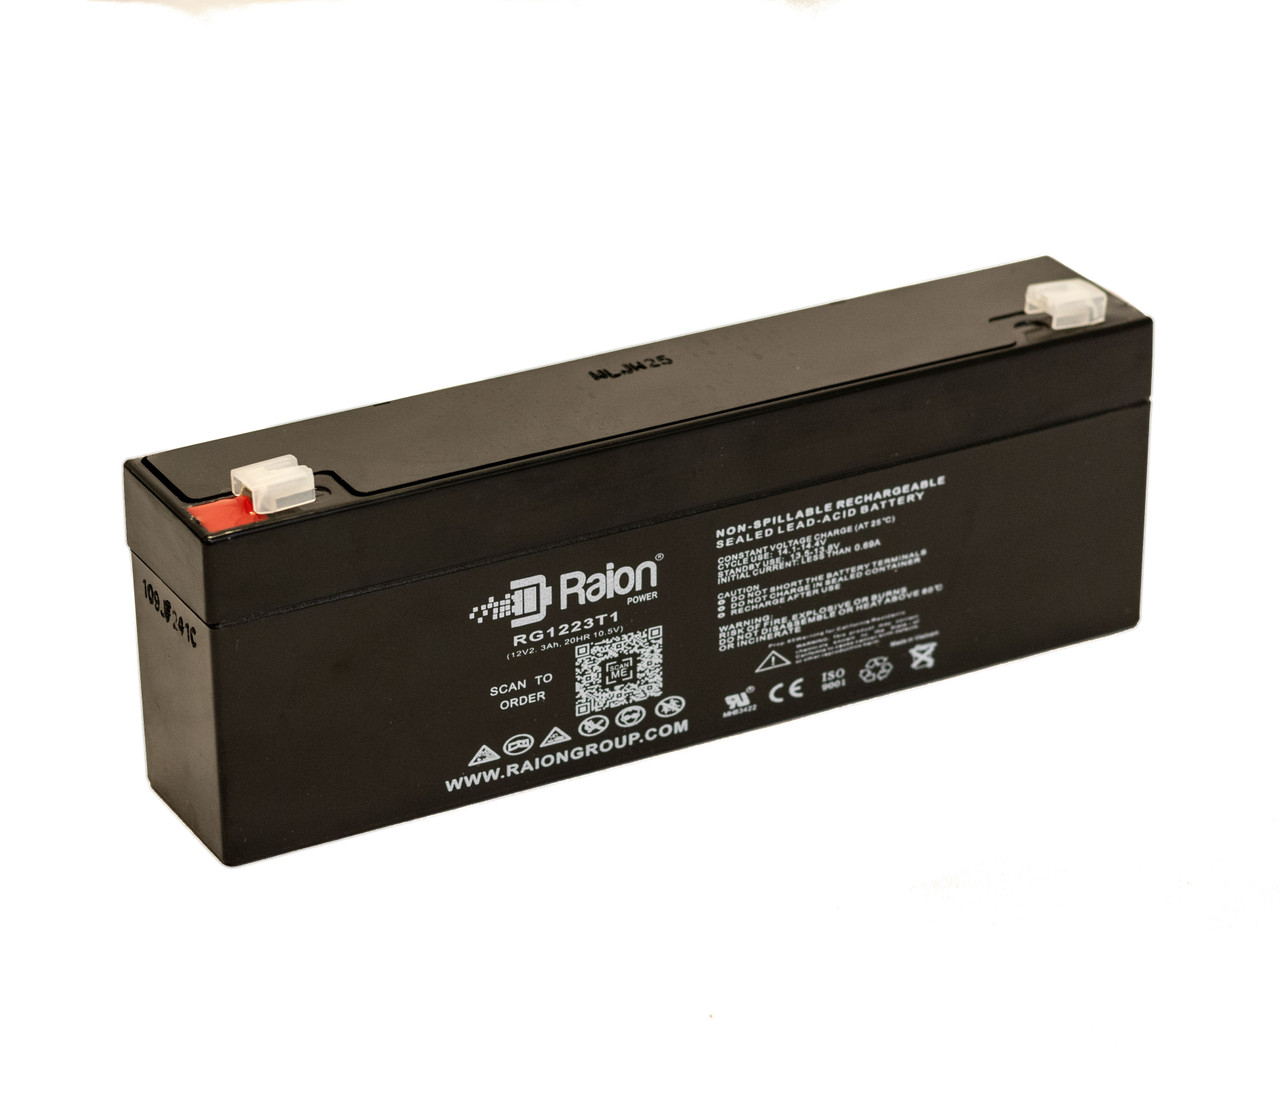 Raion Power RG1223T1 Replacement Battery for Dongjin DJ12-2.3